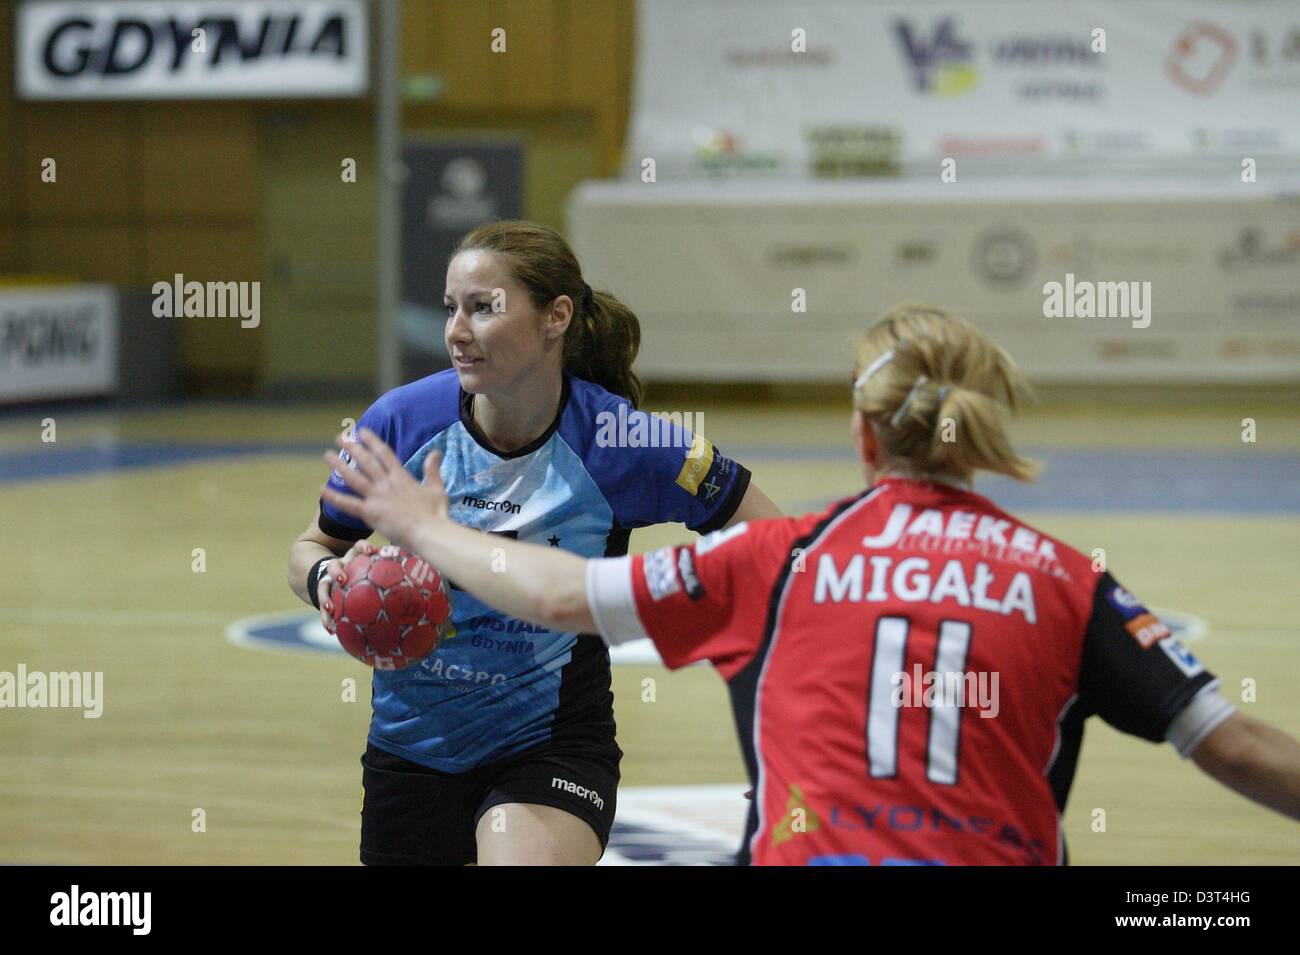 Poland 24th, February 2013 Handball: Final Four of the PGNiG Polish Cup. Vistal Laczpol Gdynia v KPR Ruch Chorzow game for 3th place in the Cup at HSW sports hall in Gdynia.Monika Migala (11) in action during the game Stock Photo